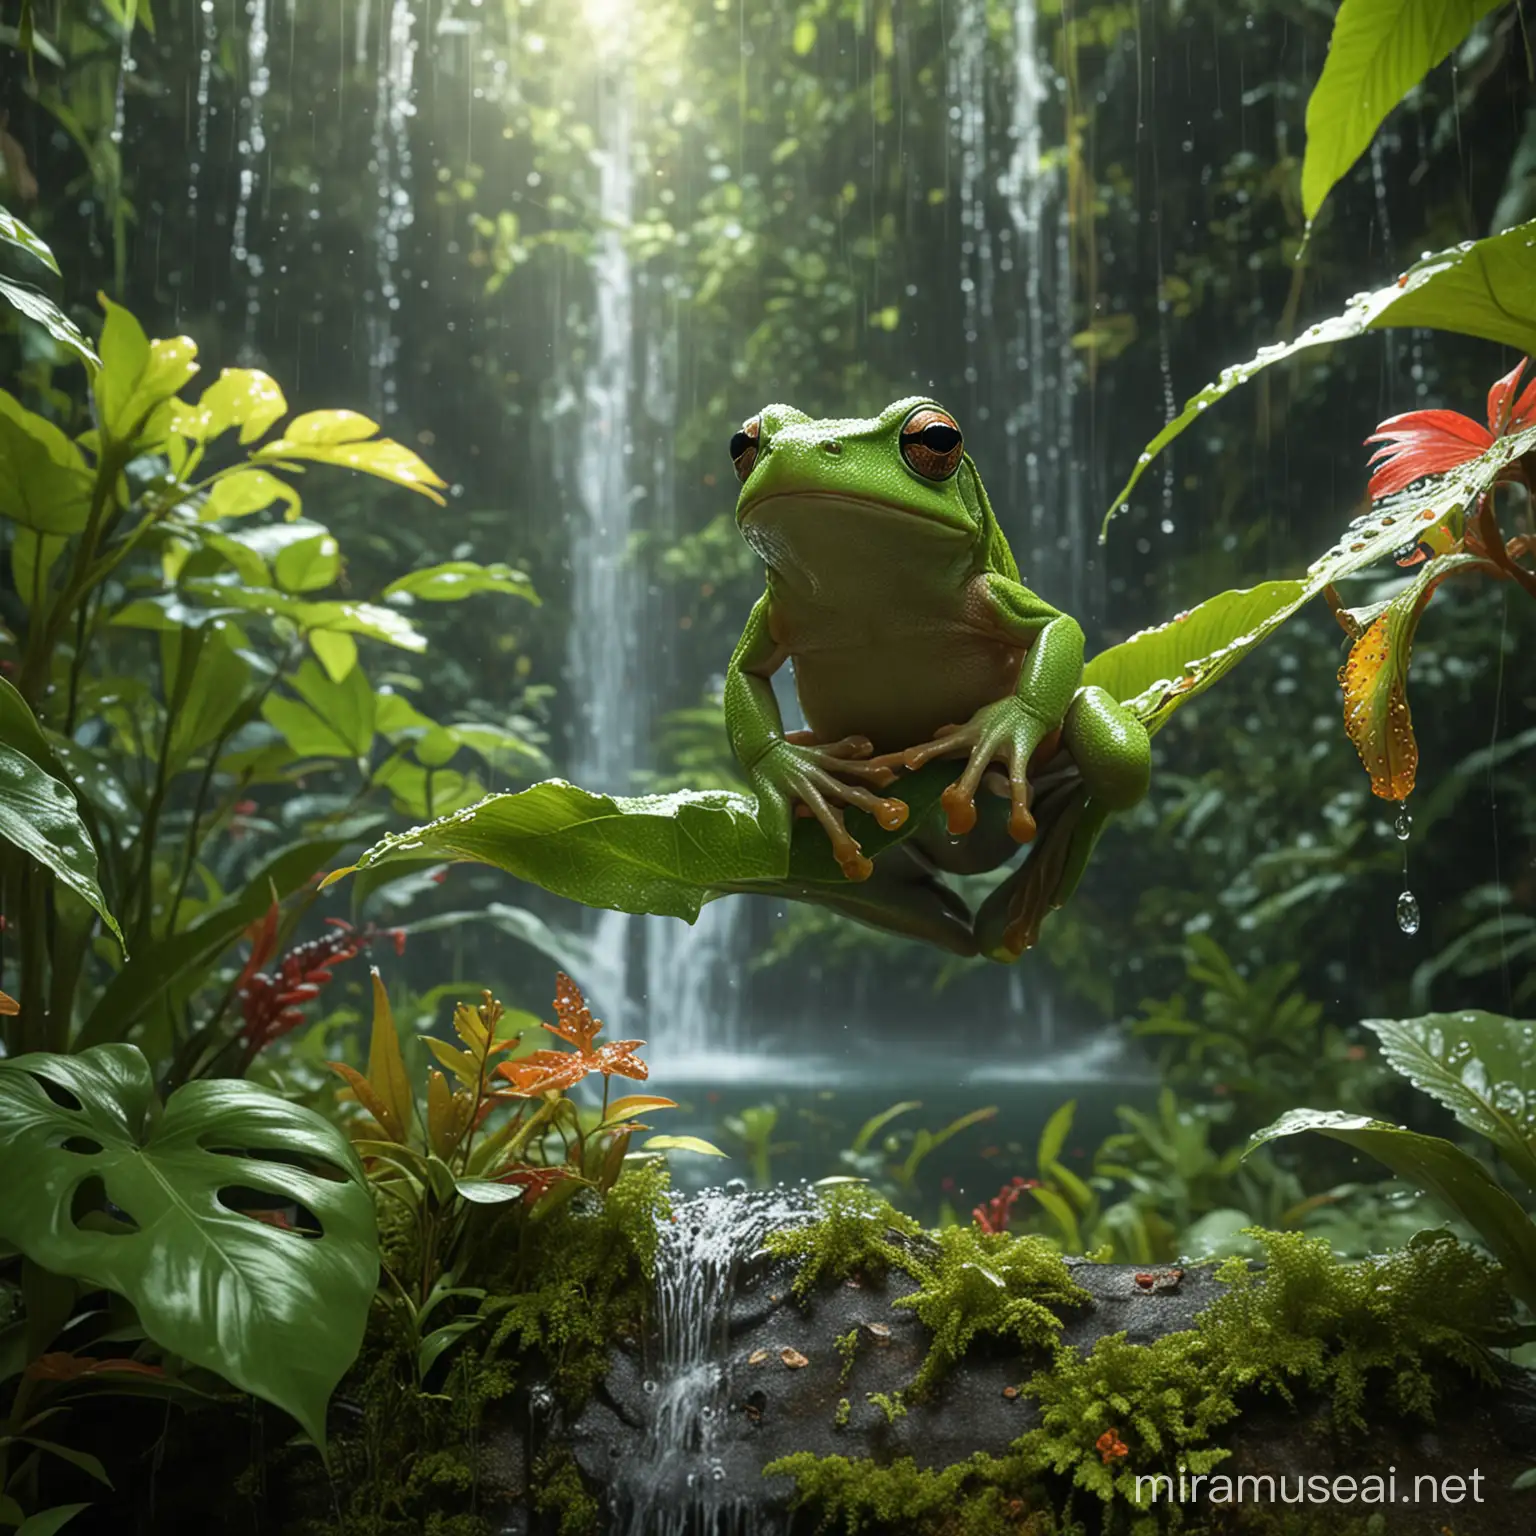 Resilient Tree Frog in Radiant Rainforest Lush Ecosystem with Exotic Animals and Cascading Waterfalls